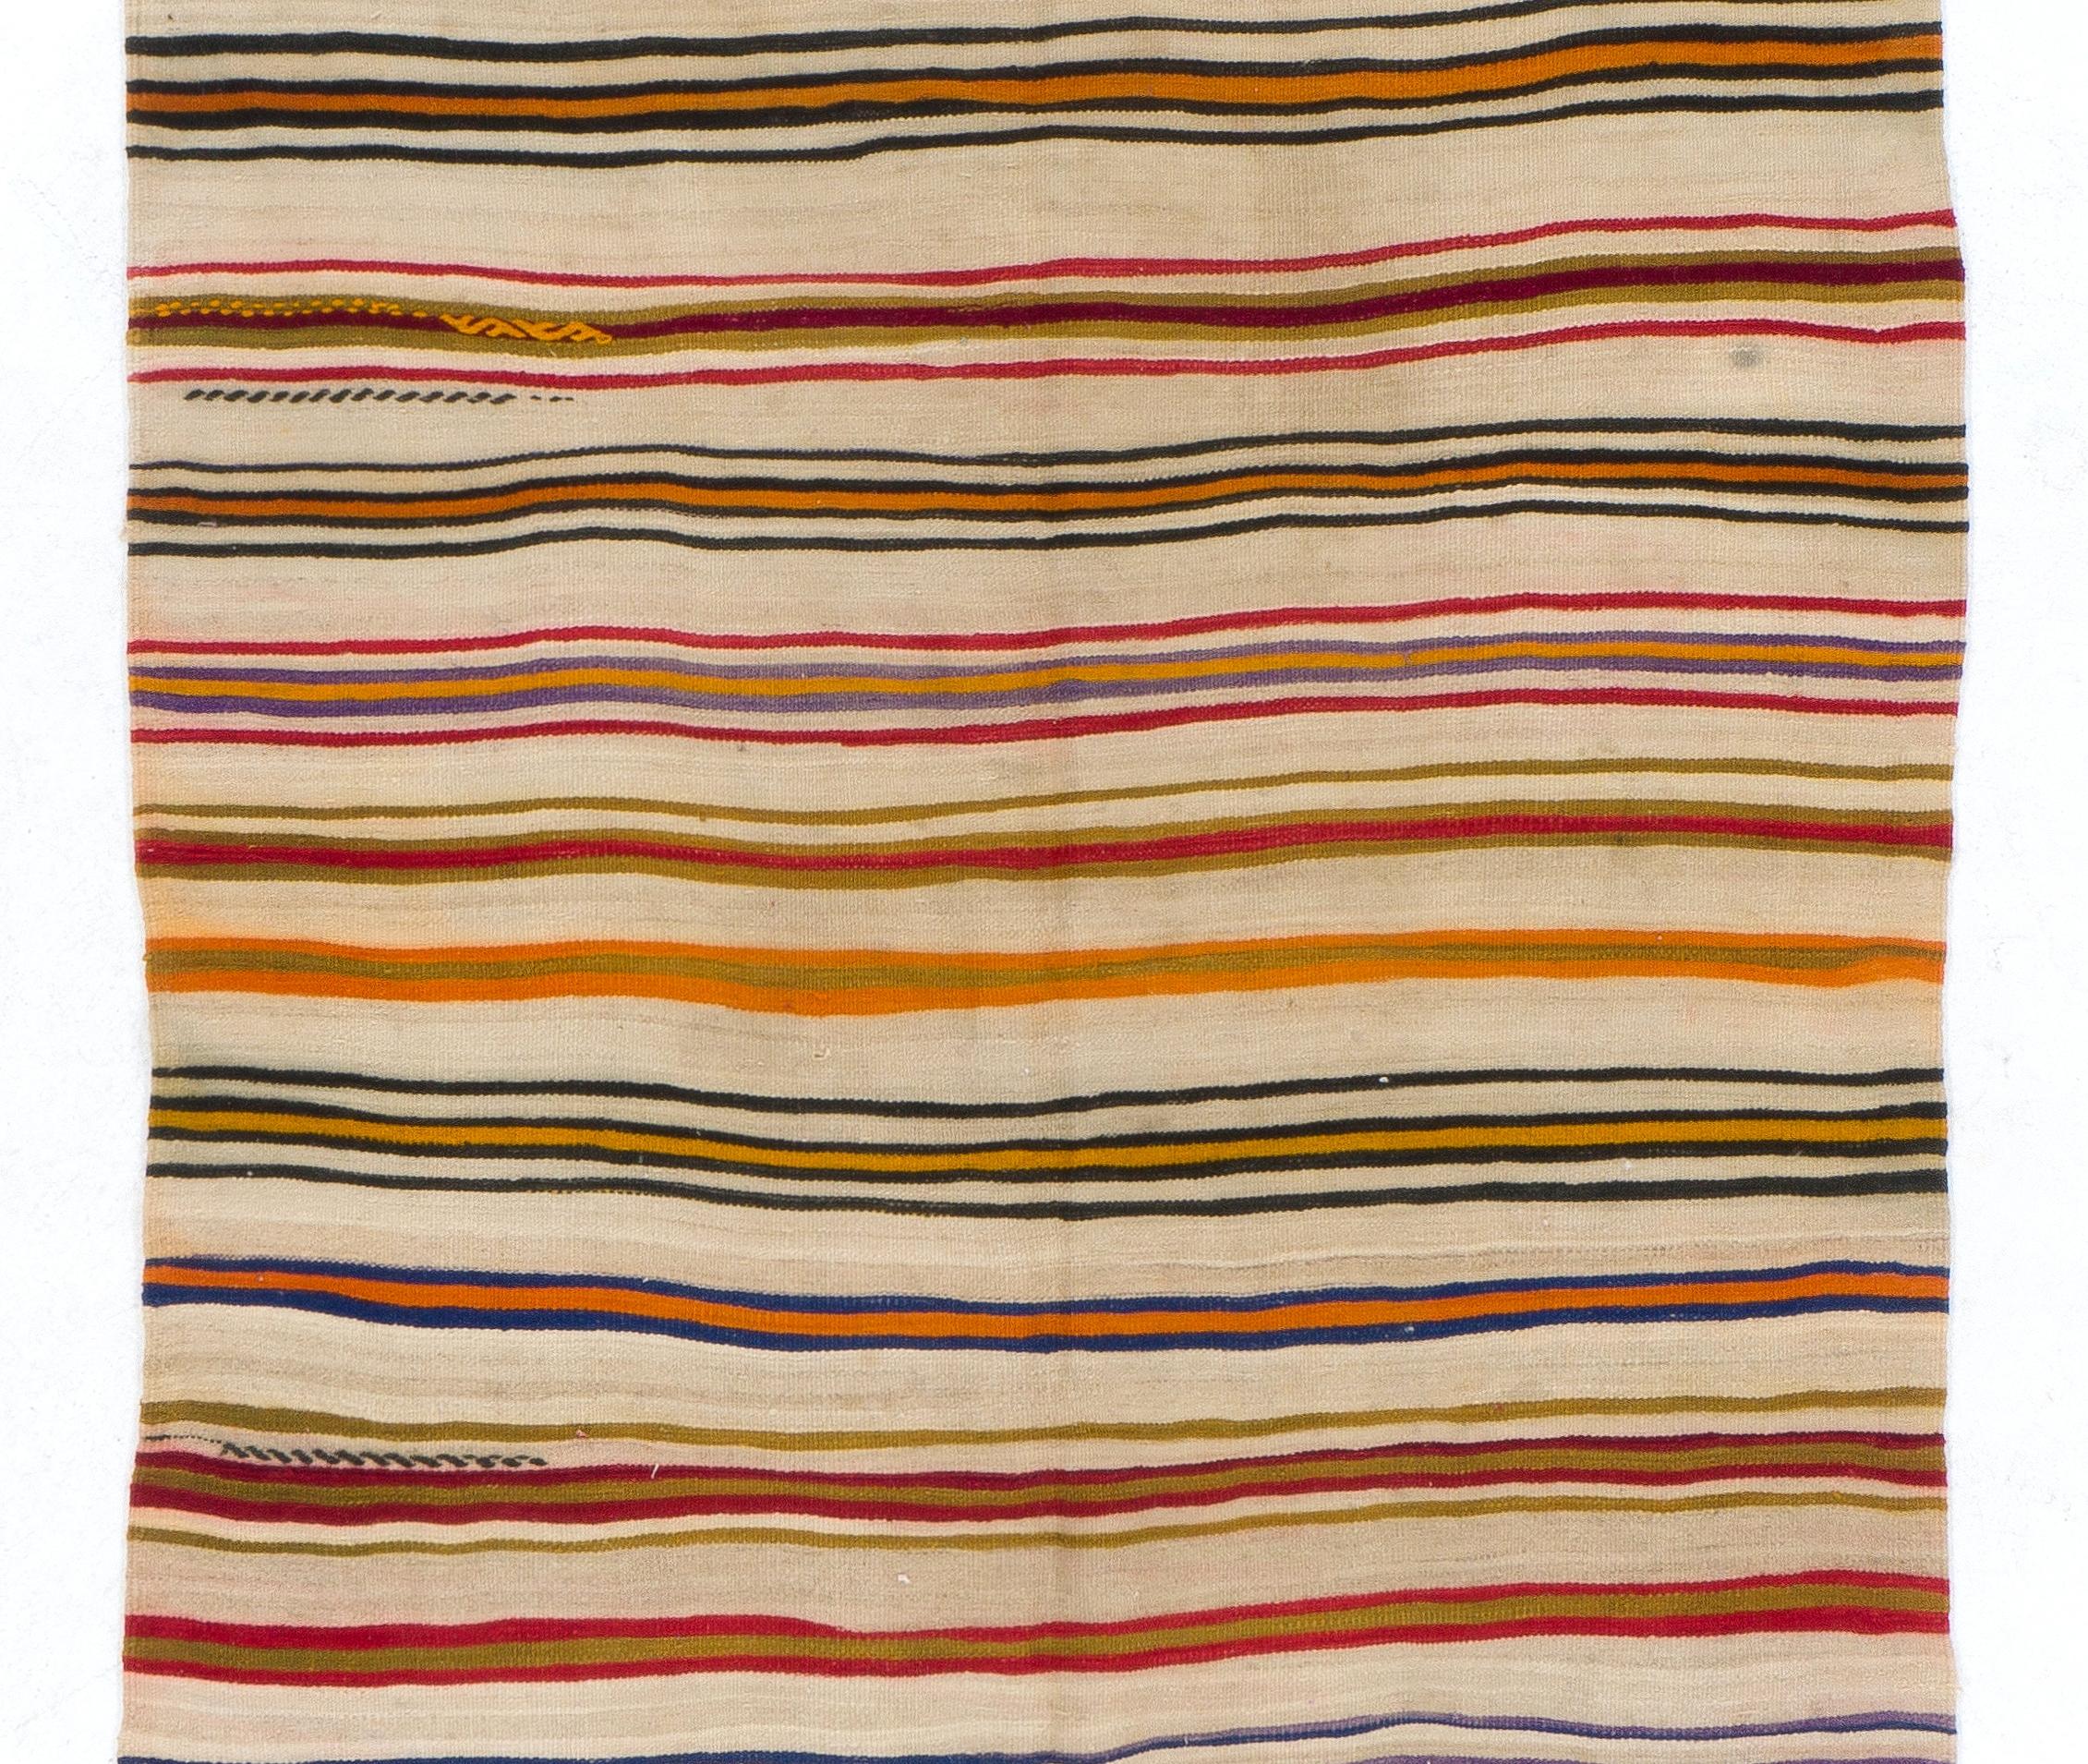 A kilim/flat-weave made of wool handwoven by the nomadic tribes in the 1960s in South Central Turkey with a minimalistic striped design in a gorgeous, bright and warm color palette of deep saturated orange, red, burgundy, royal blue, chartreuse